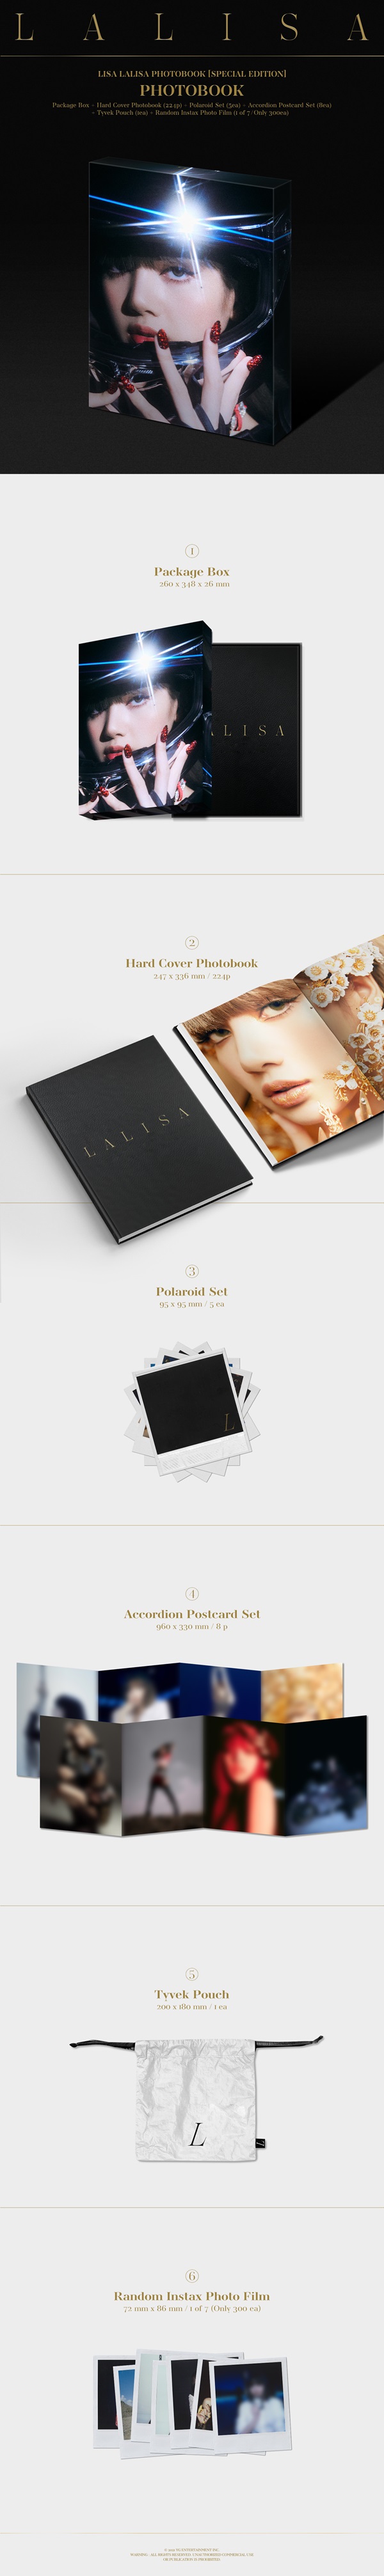 LISA -LALISA- PHOTOBOOK [SPECIAL EDITION] ［BOOK+GOODS］_2